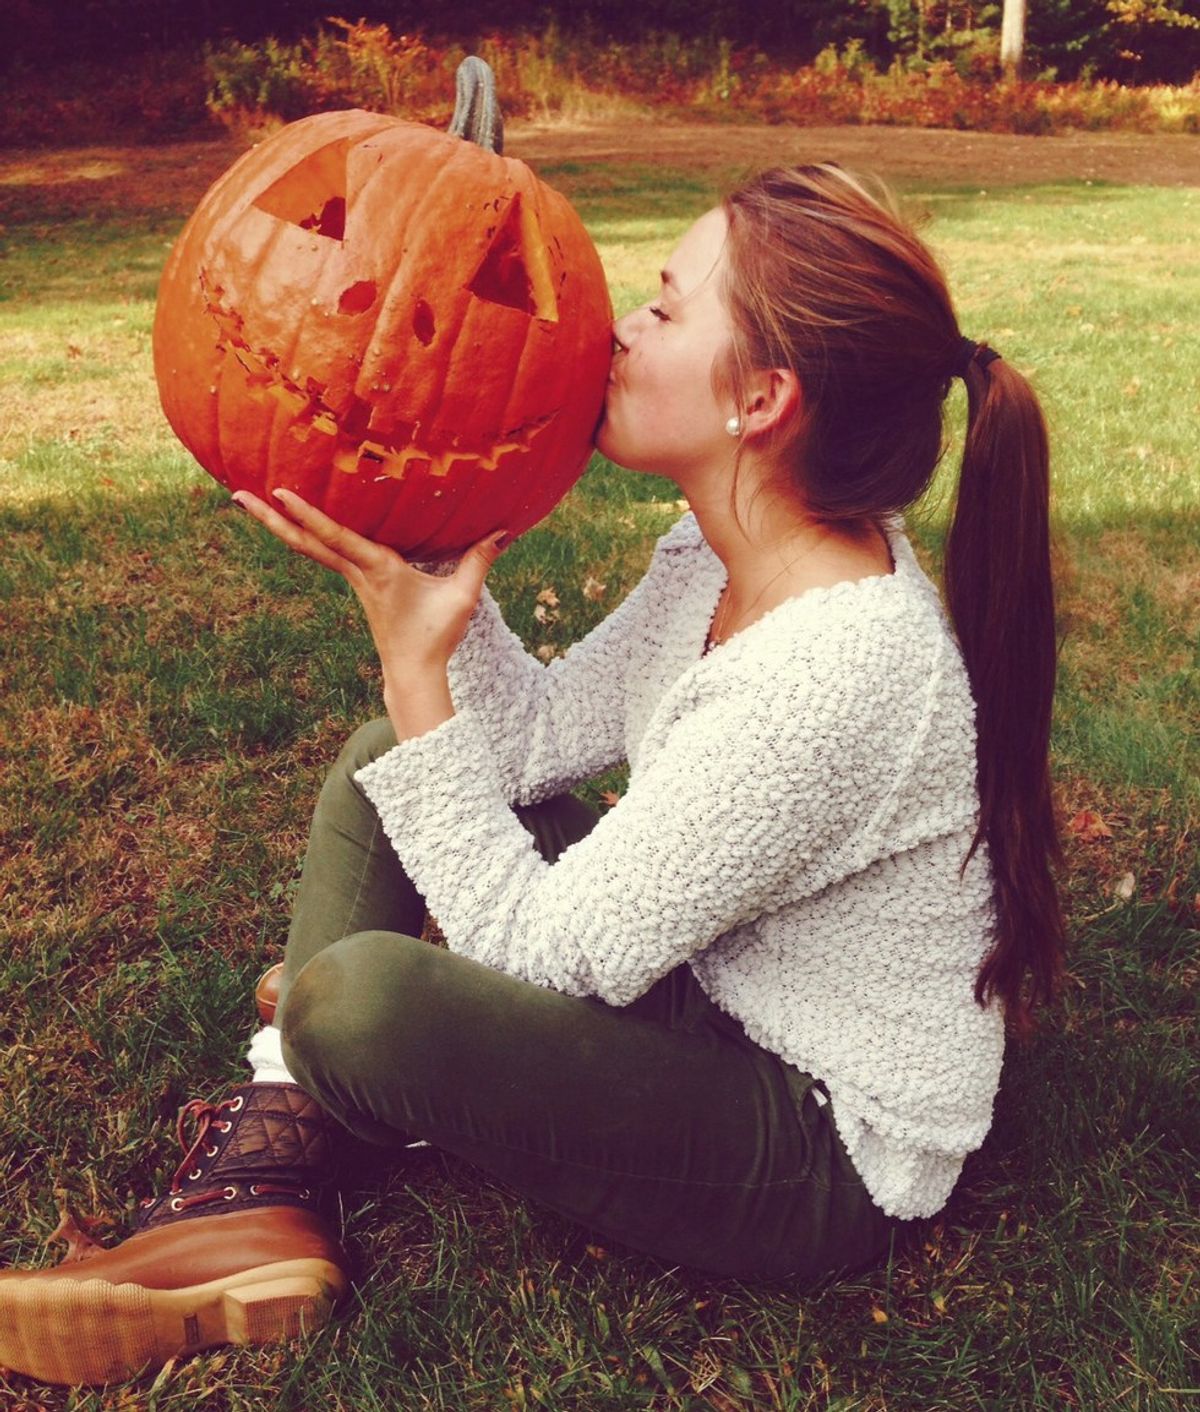 It's Finally Time To "Fall" In Love